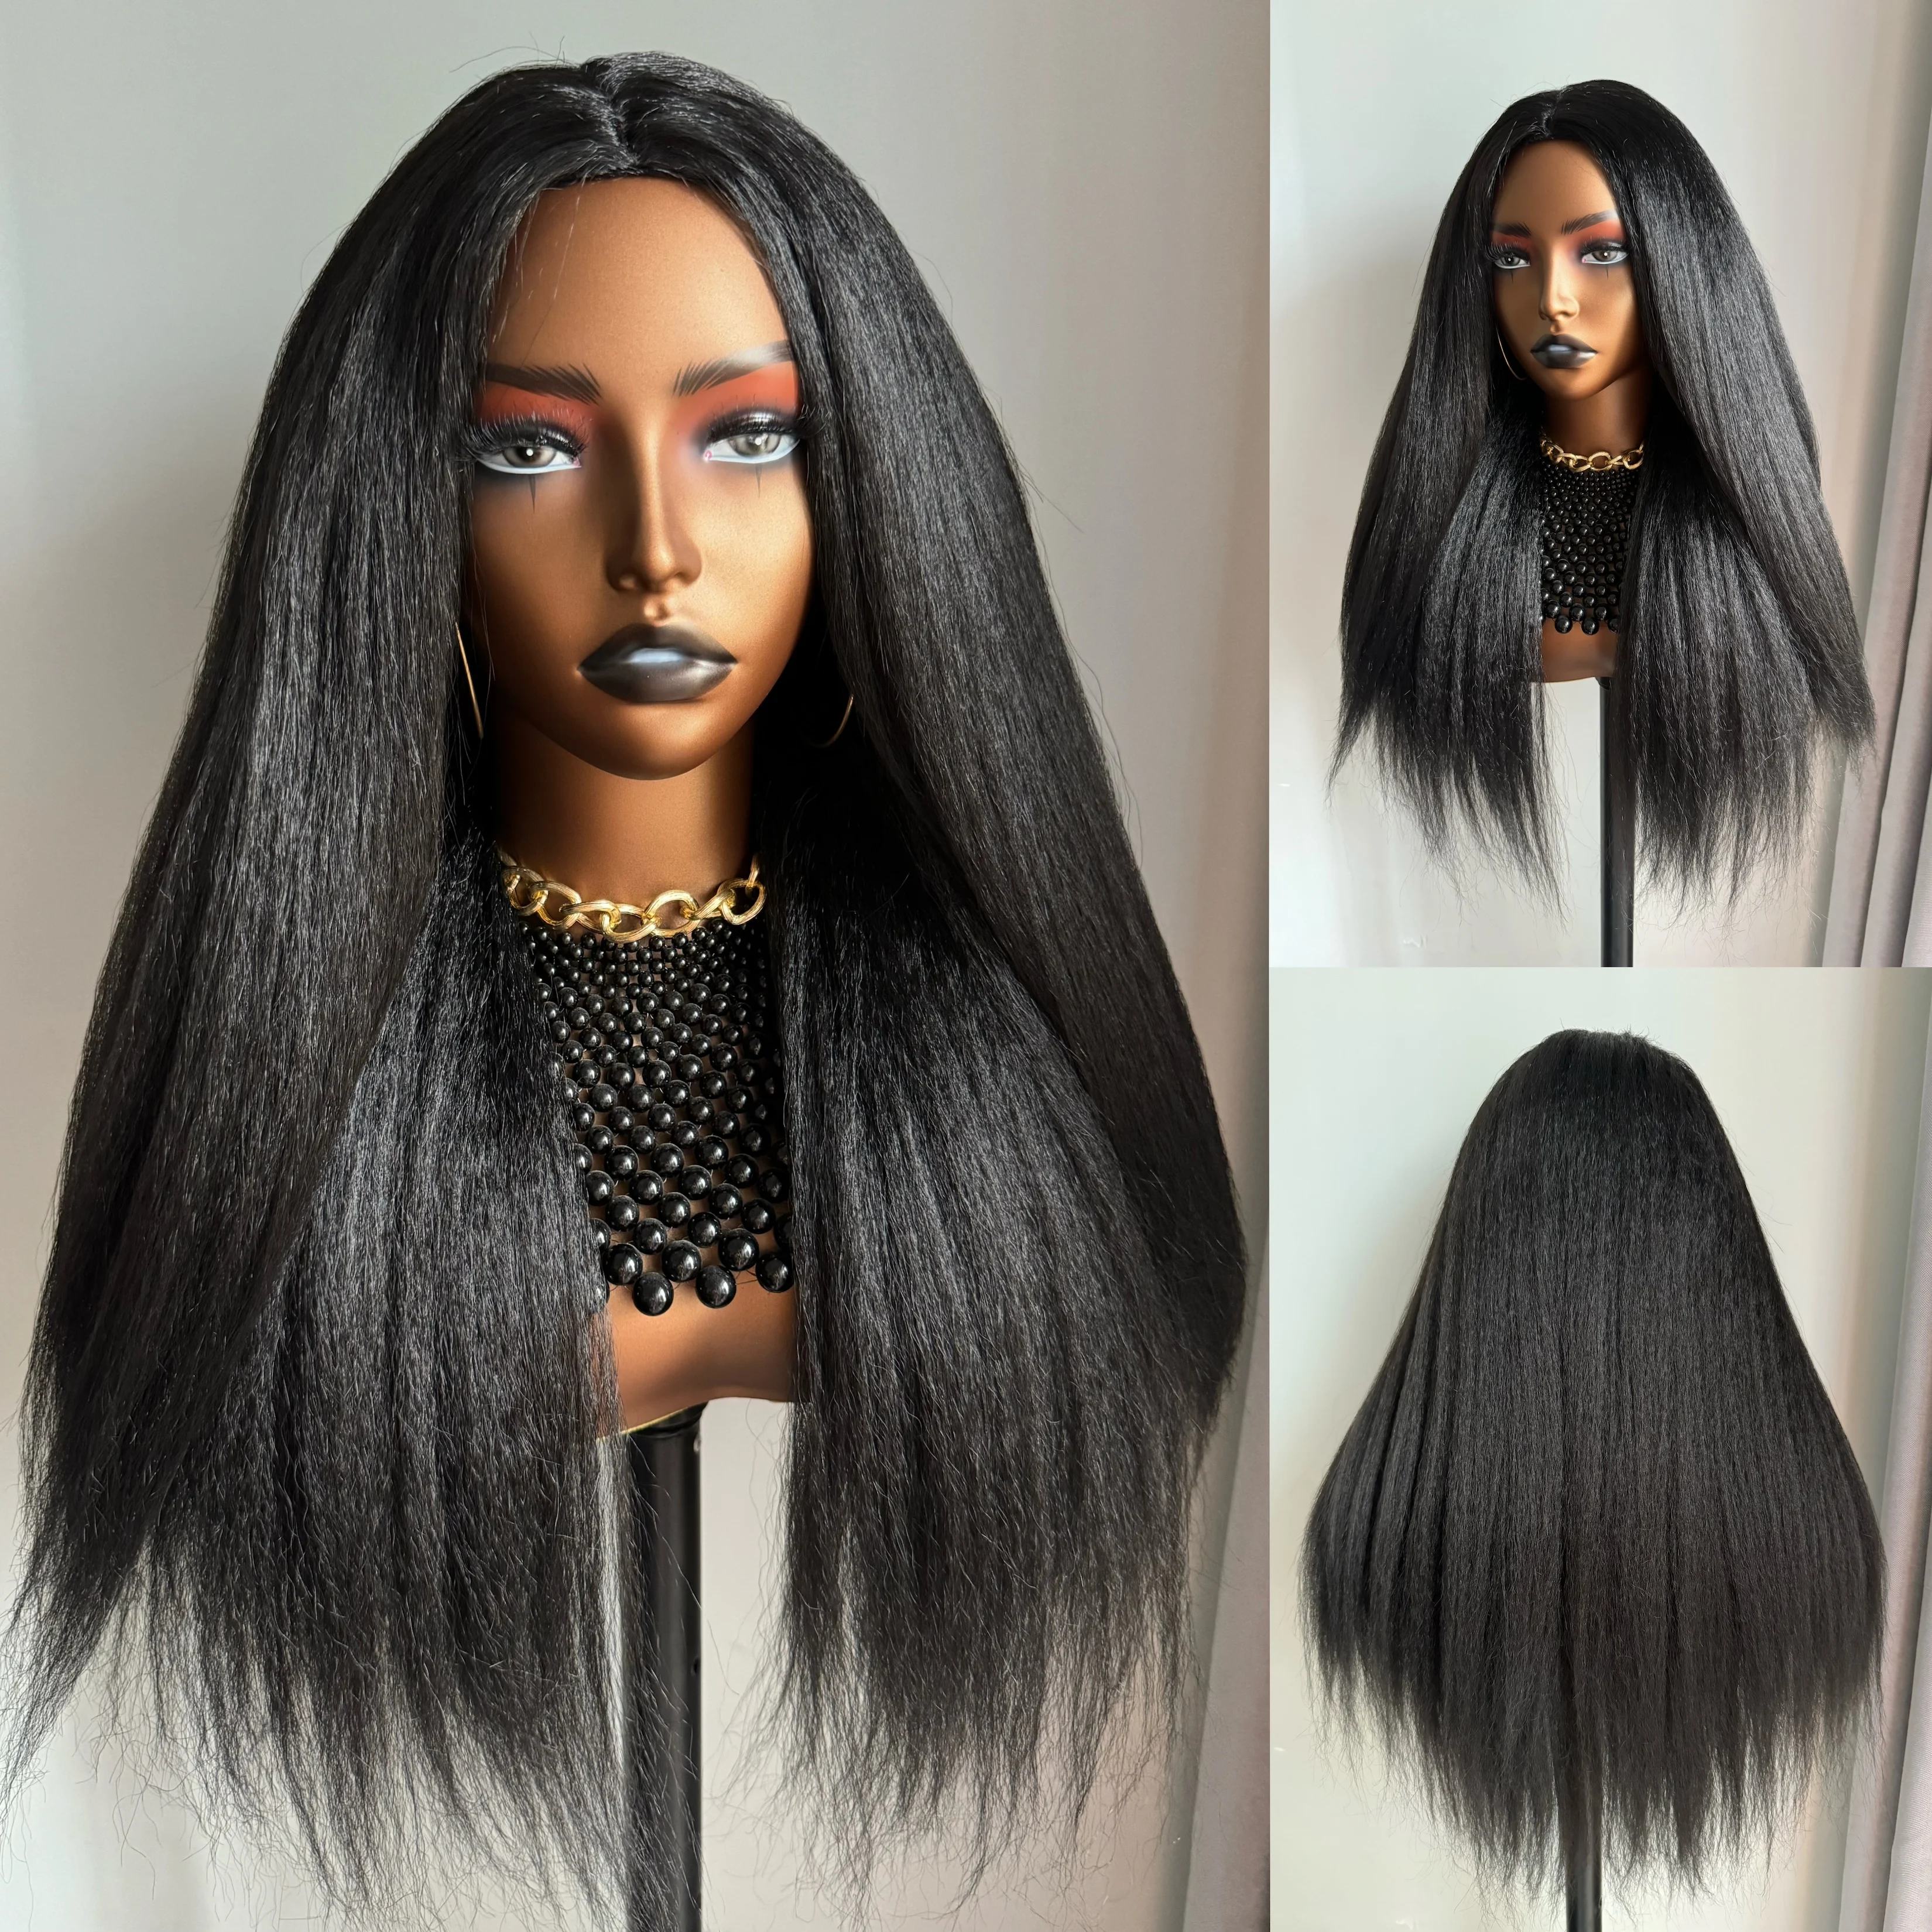 

WIgera Long 22Inch Black Kinky Straight Wigs Yaki Straight Synthetic Hair Wig Cheap Wigs For Black Women Full Machine Made Wigs